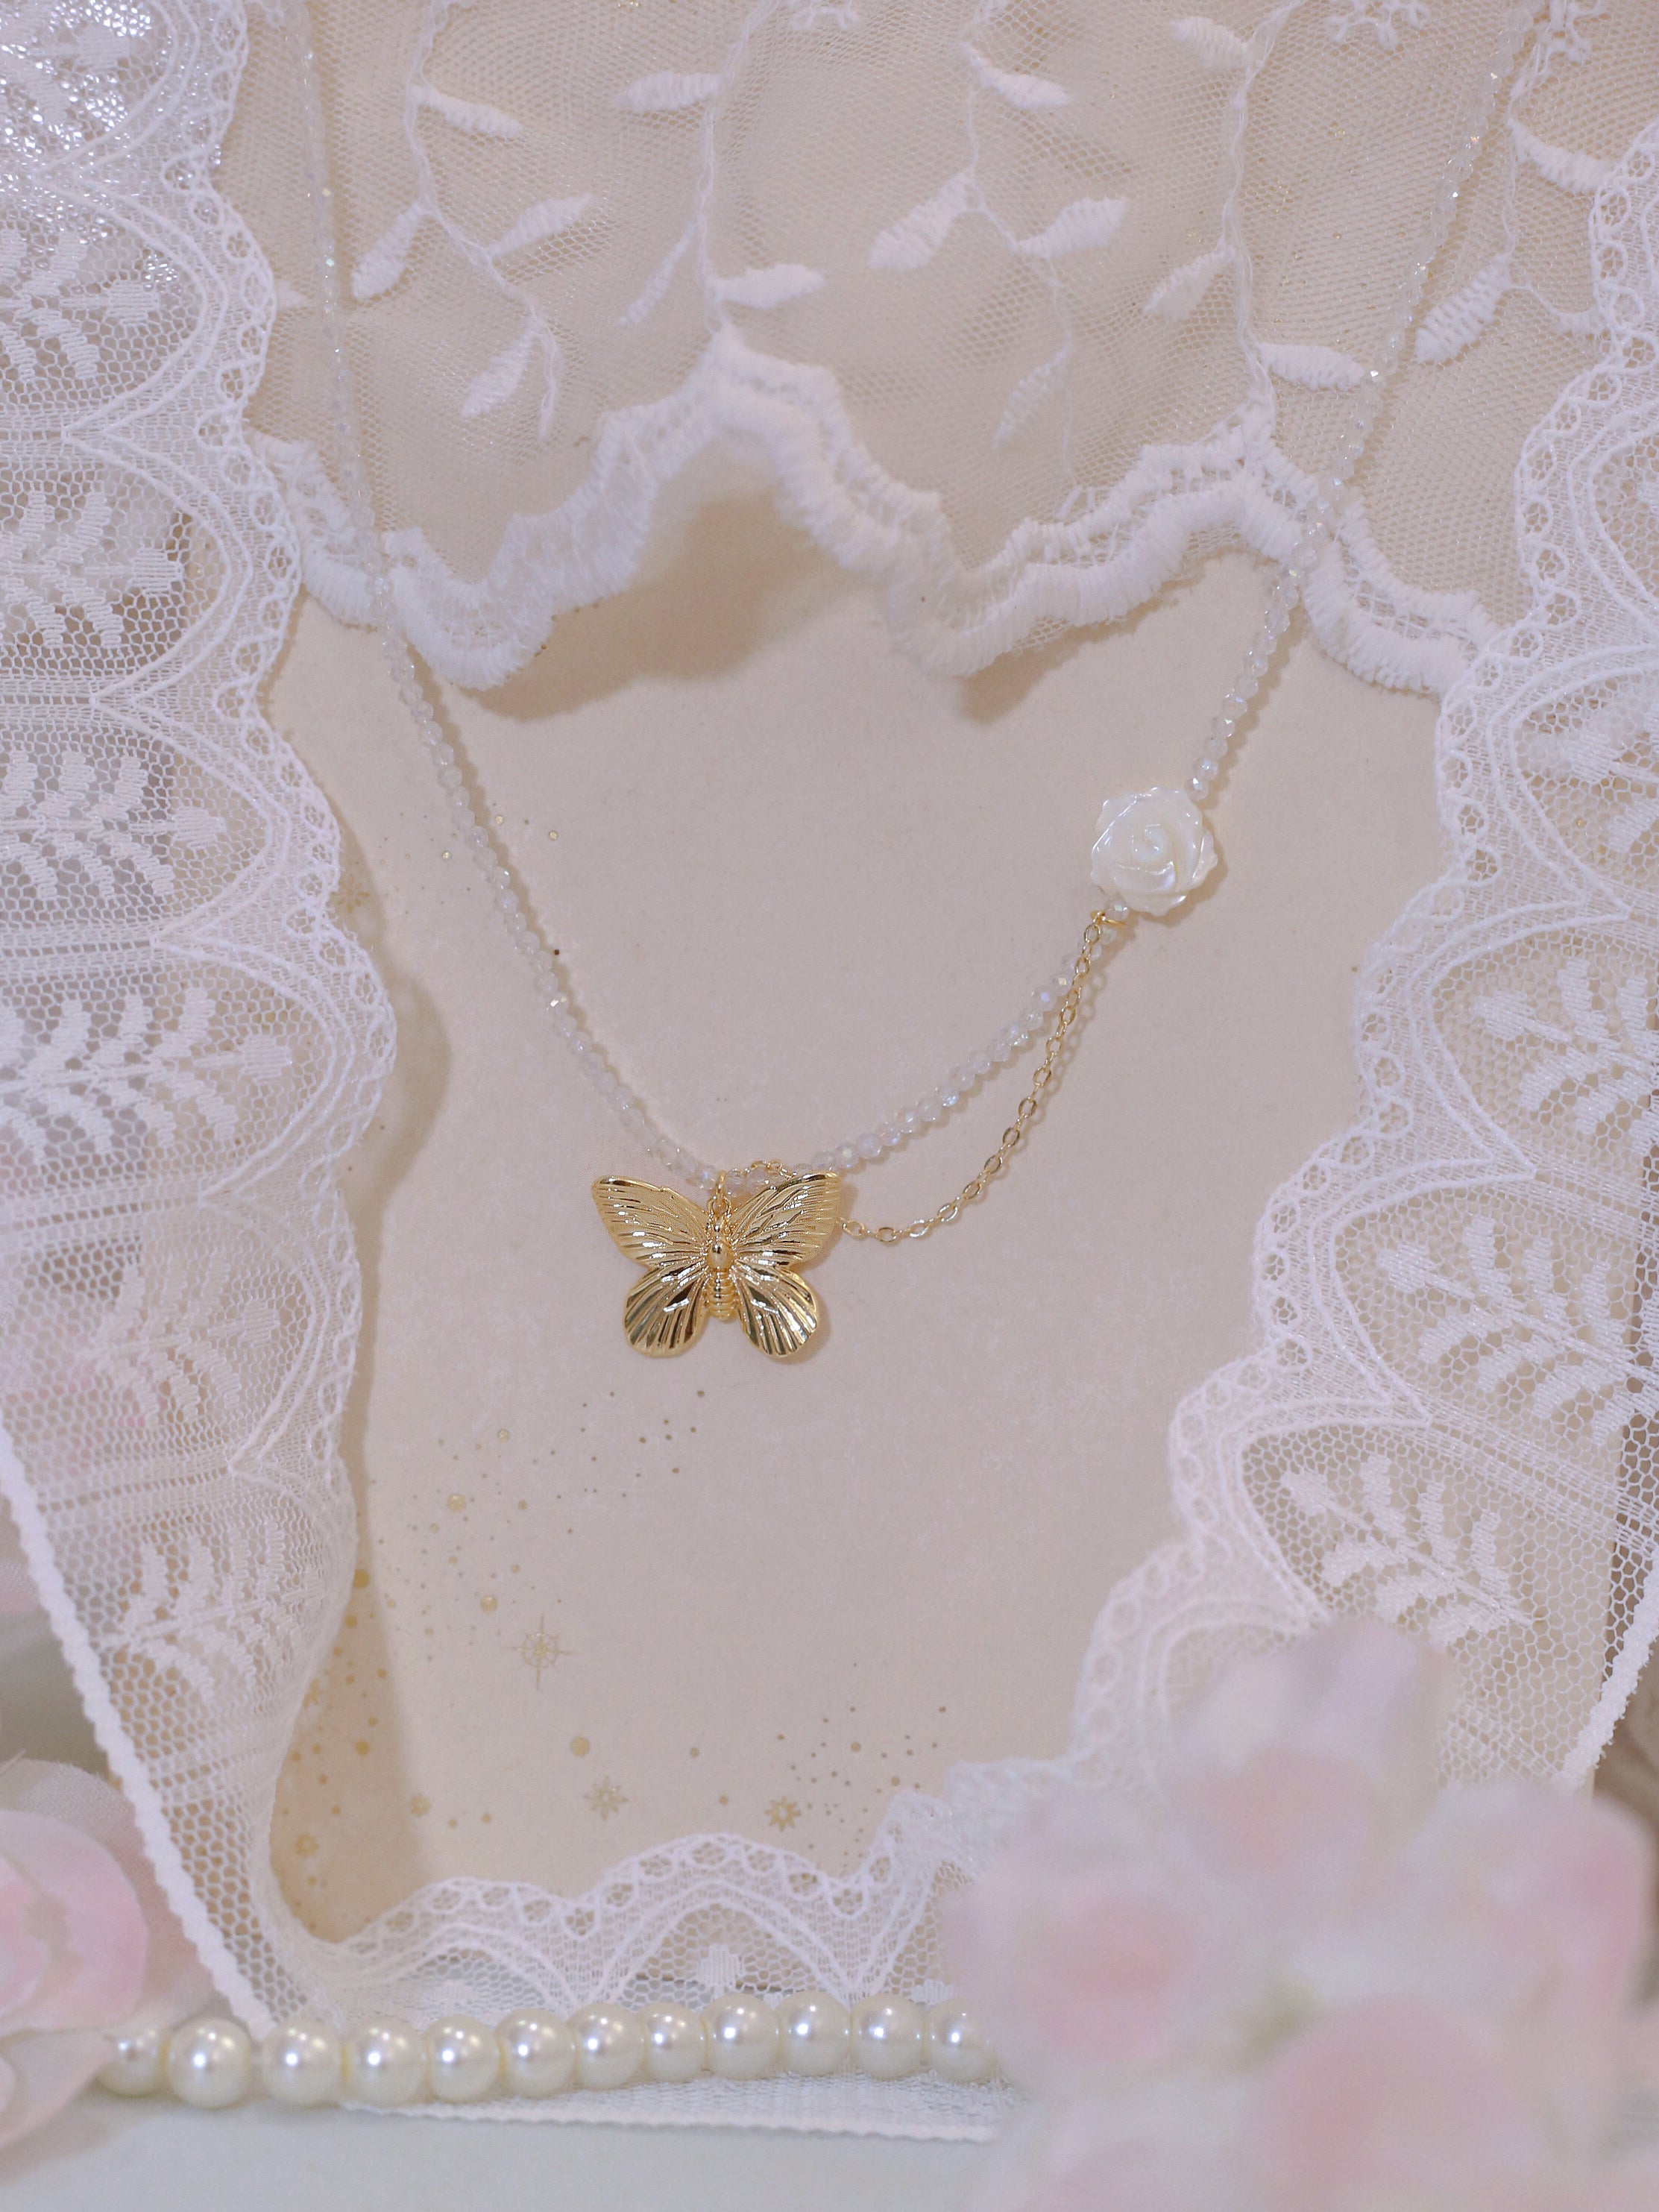 Golden Butterfly And White Rose Handmade Necklace/Choker